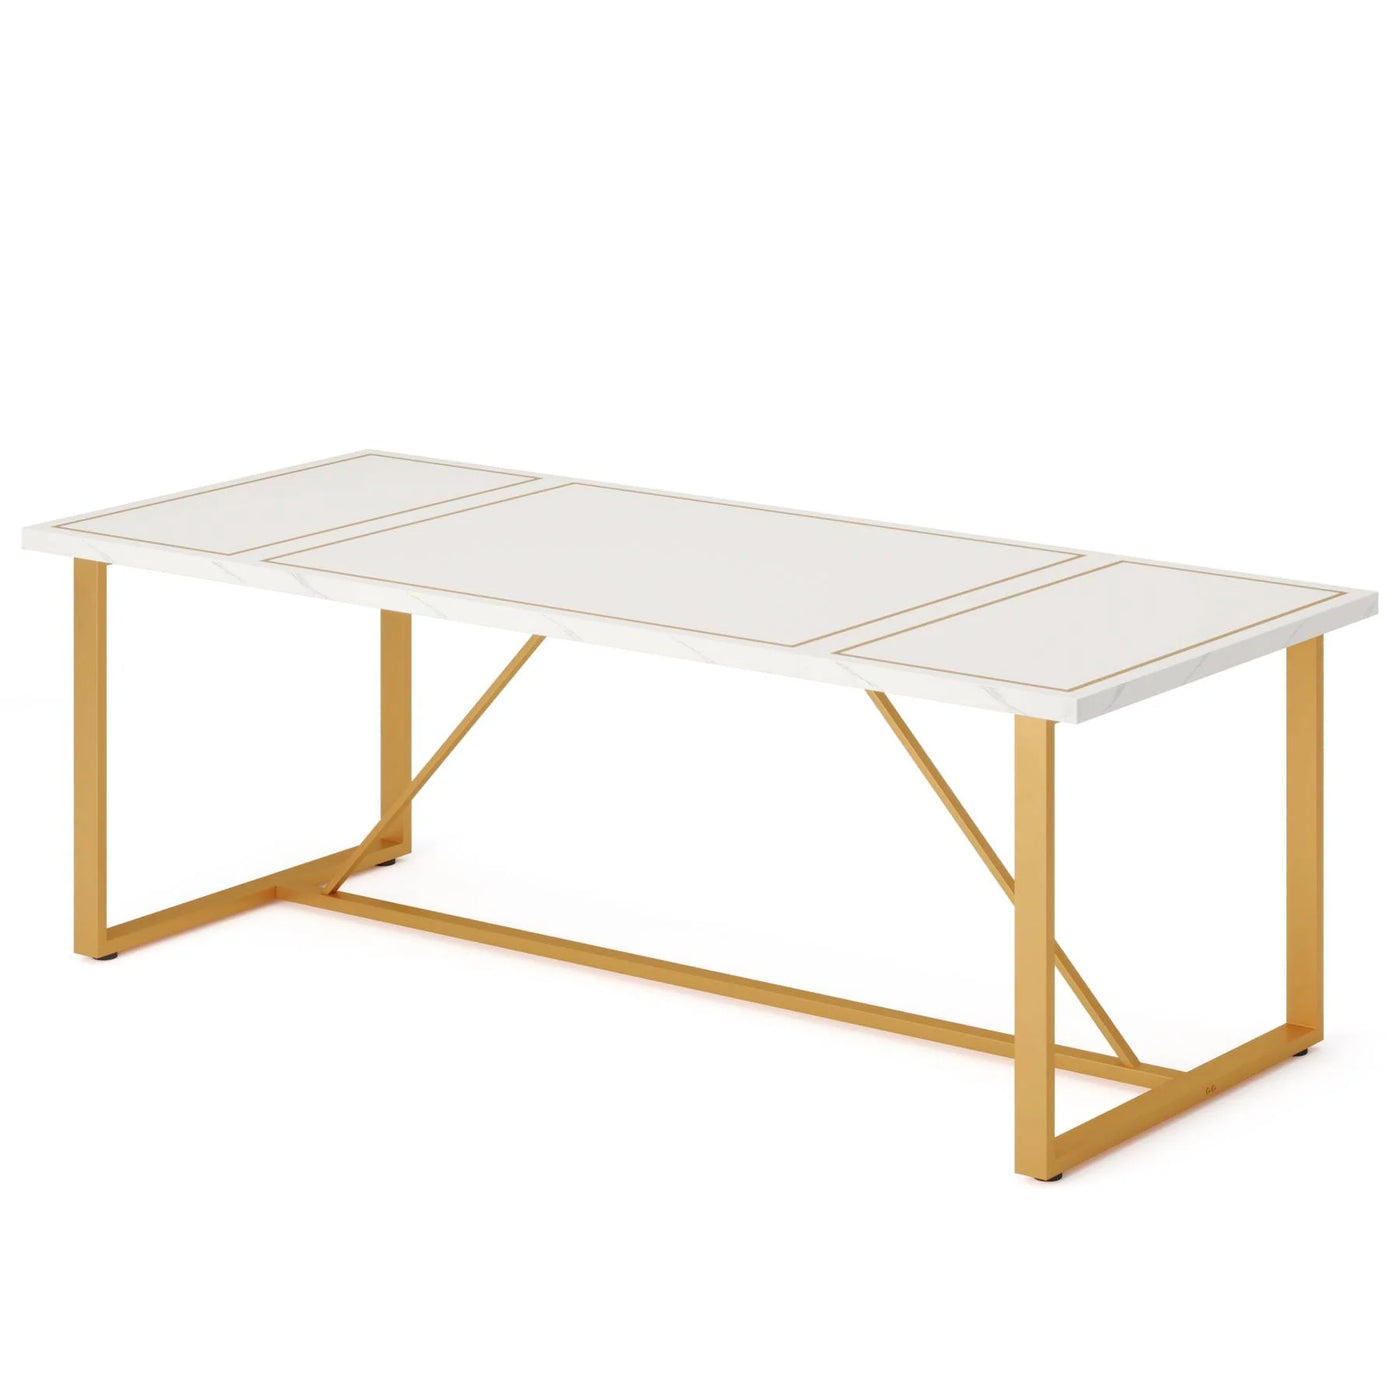 Cest Wooden Modern Dining Table | 70.9" Rectangle Dinner Table for 6-8 People